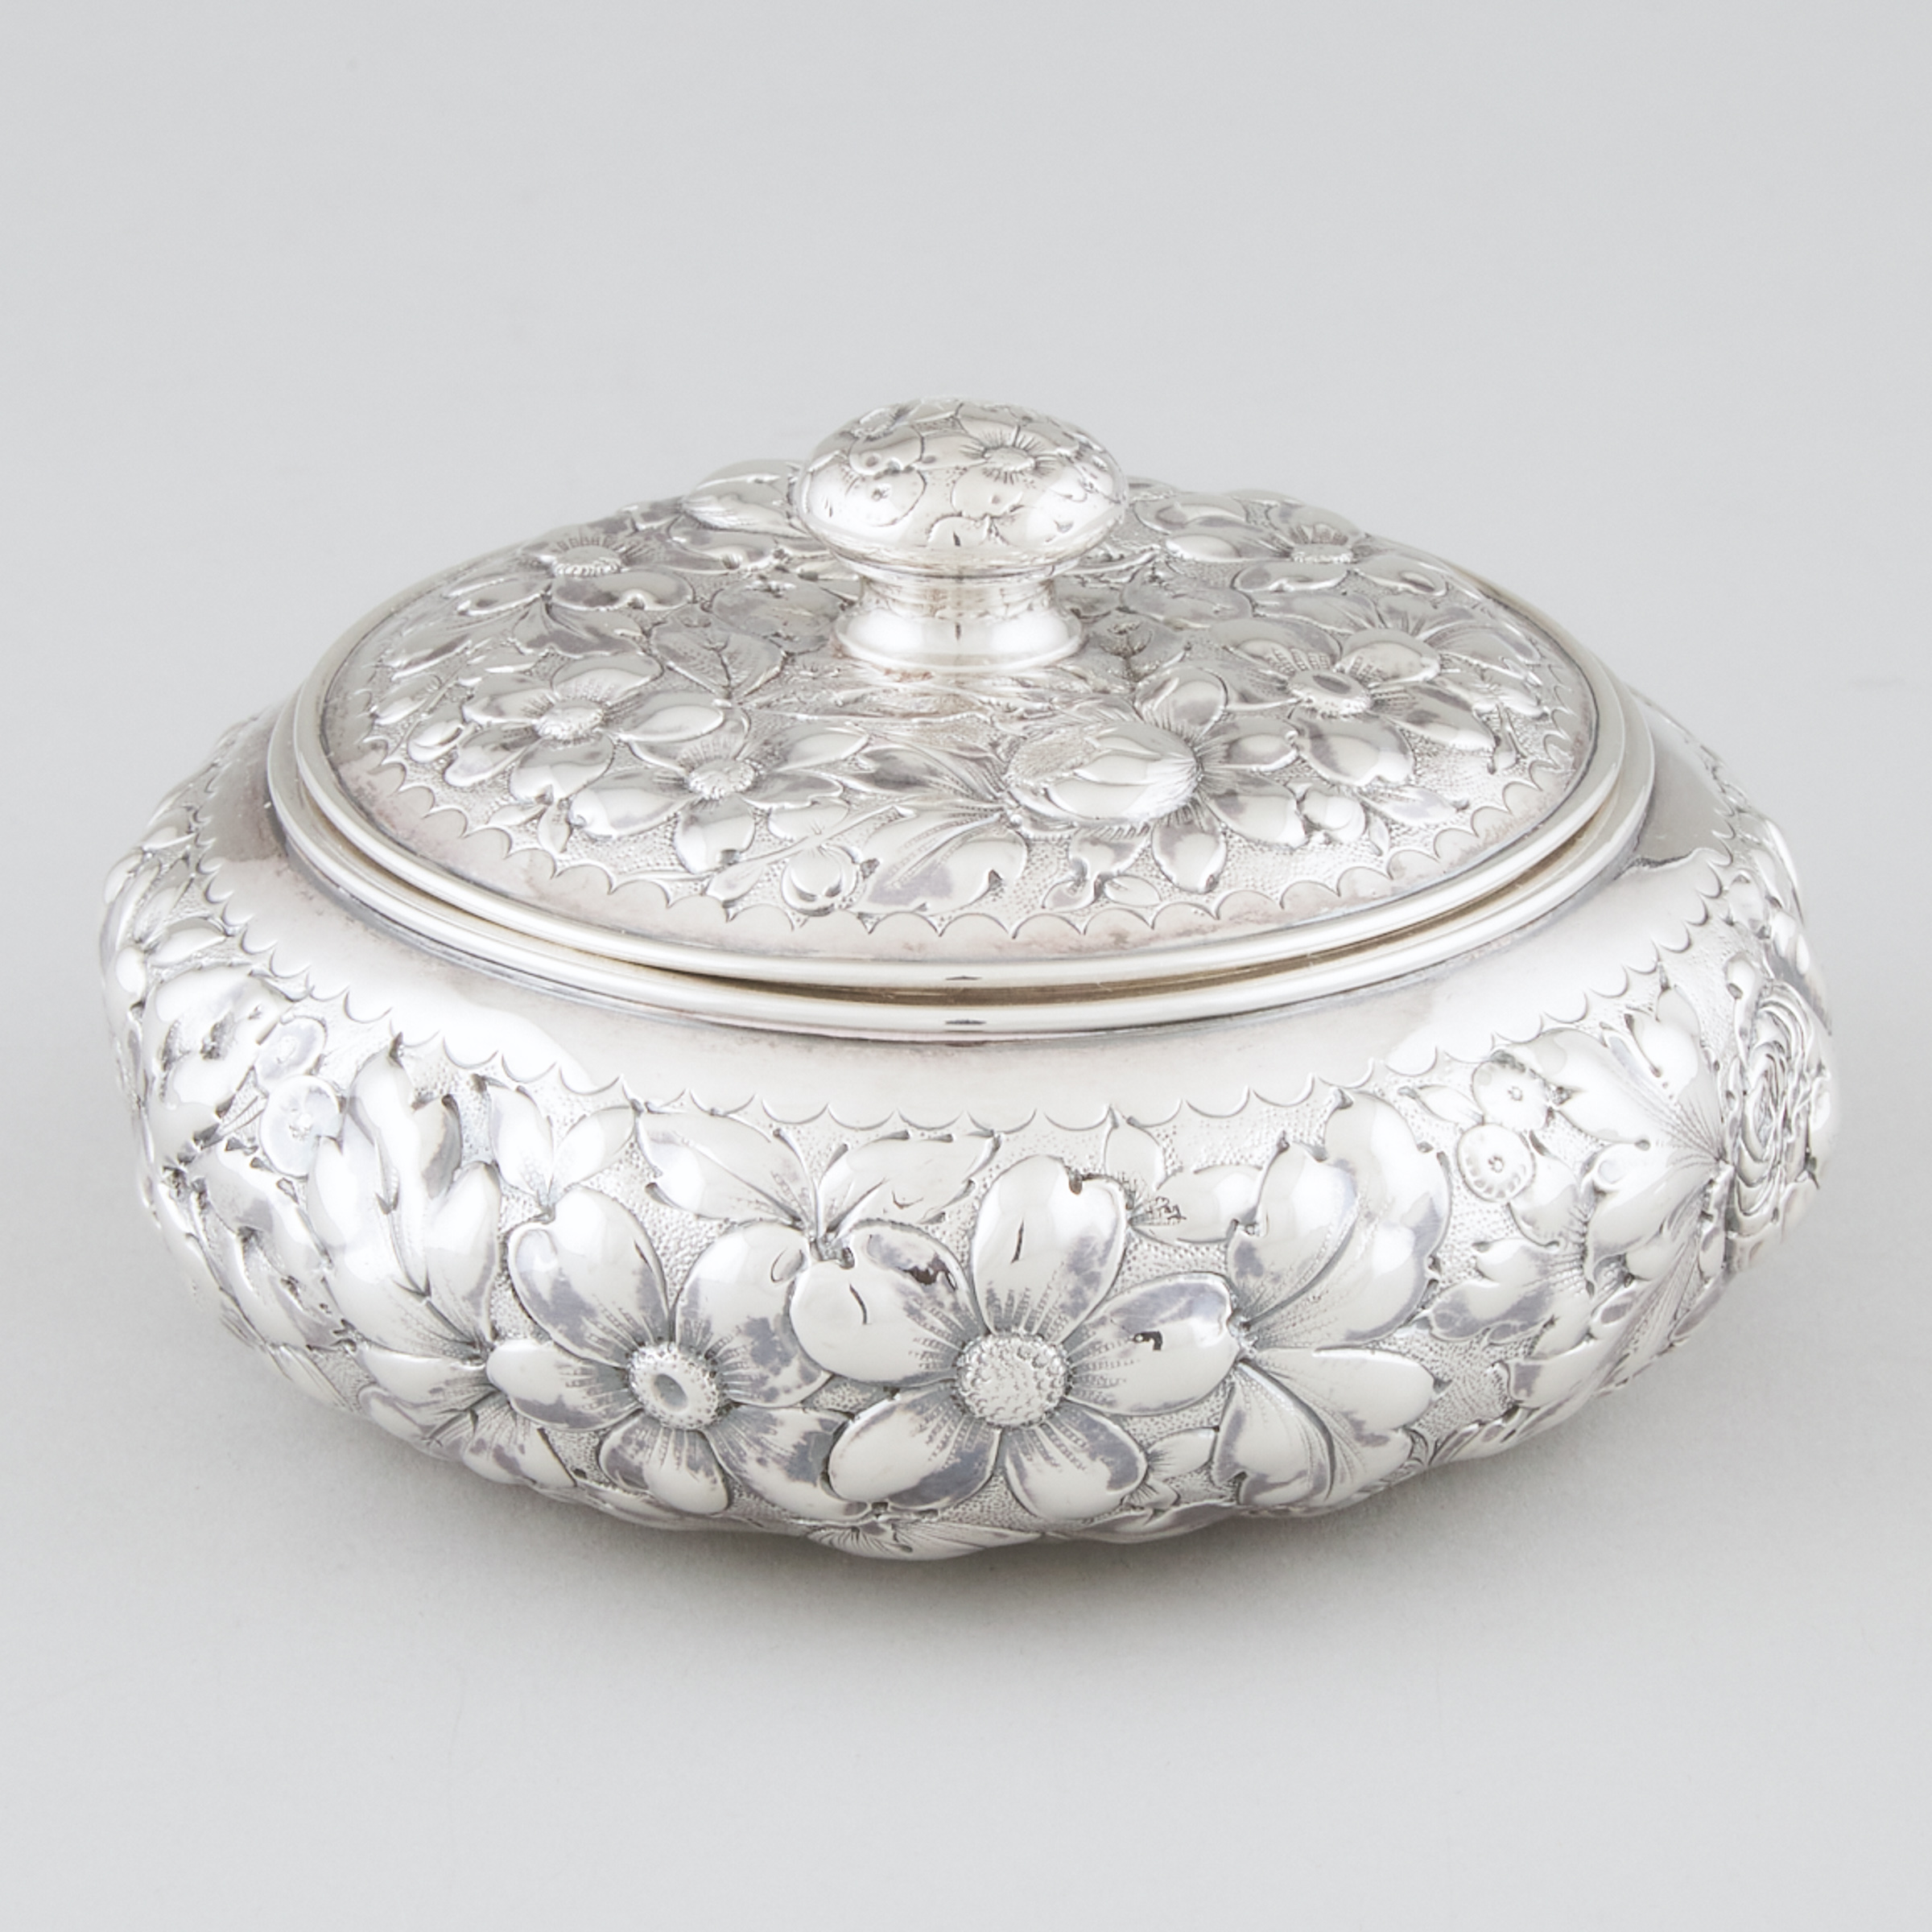 American Silver Repoussé Circular Covered Box, Gorham Mfg. Co., Providence, R.I., c.1891